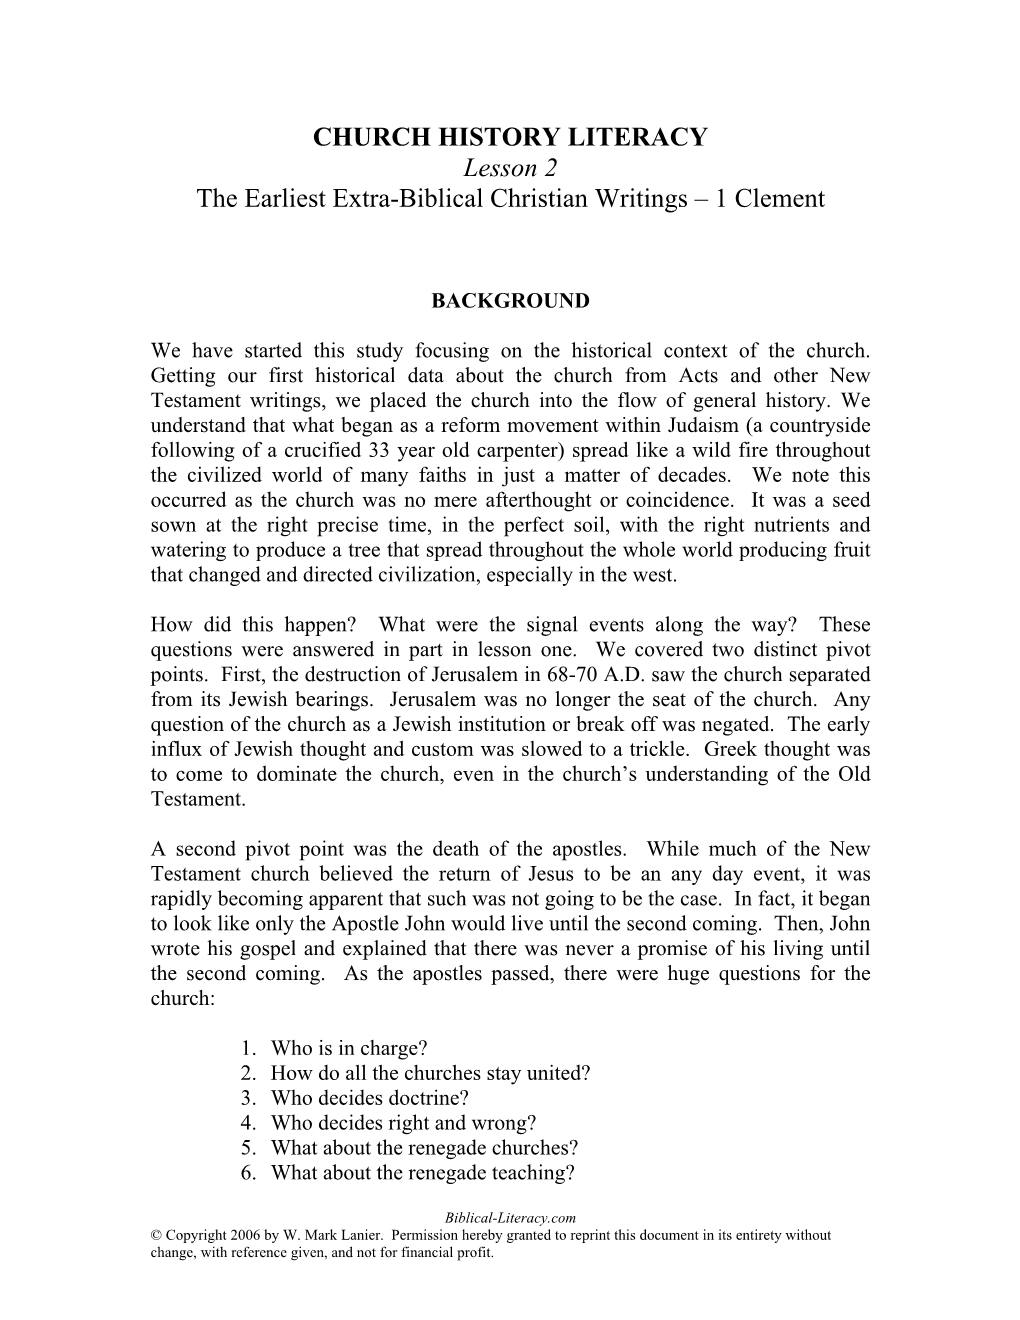 CHURCH HISTORY LITERACY Lesson 2 the Earliest Extra-Biblical Christian Writings – 1 Clement